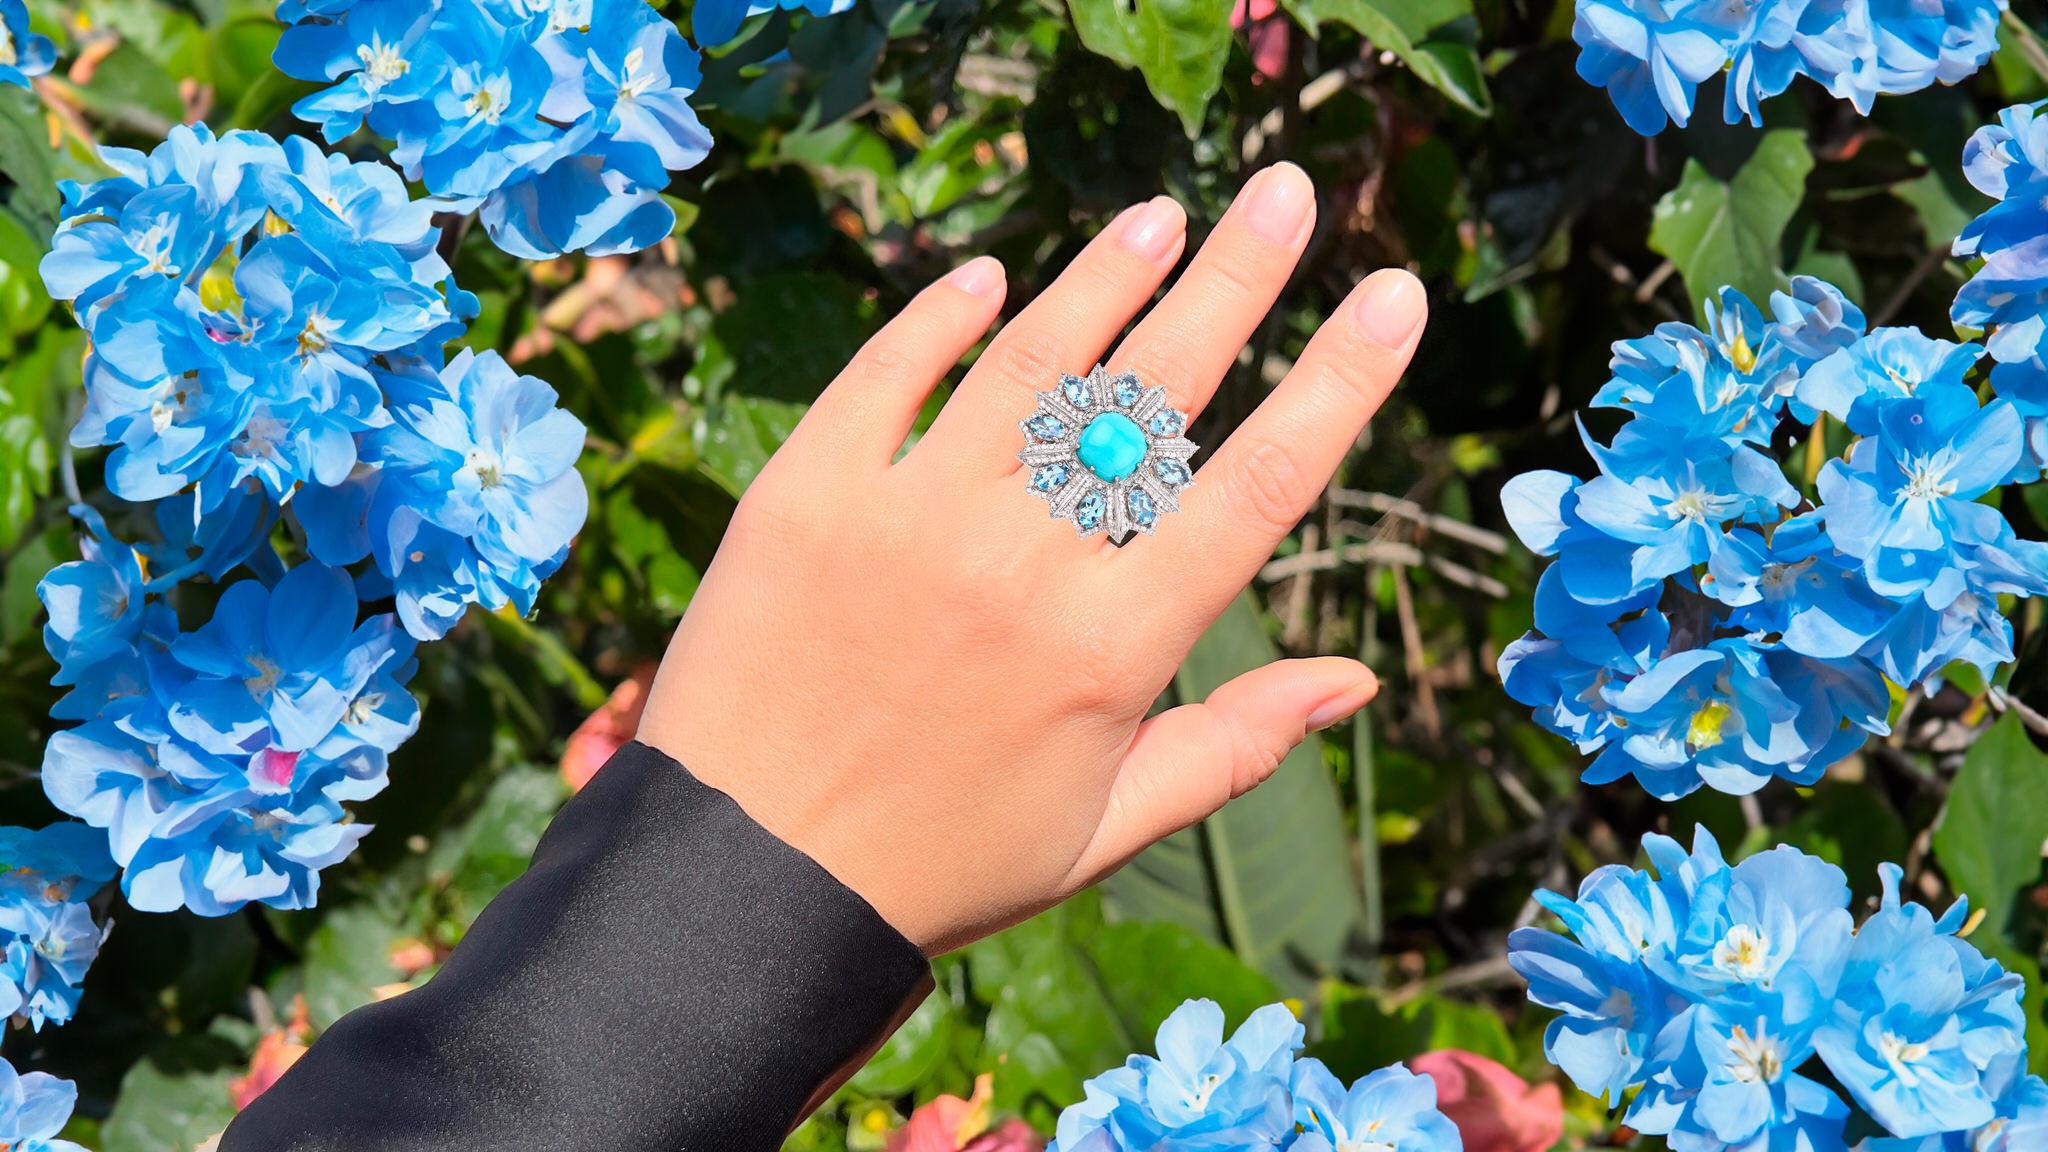 It comes with the Gemological Appraisal by GIA GG/AJP
All Gemstones are Natural
Cabochon Turquoise = 5 Carat
8 Oval Aquamarines = 2.95 Carats
144 Round Diamonds = 1.02 Carats
Metal: Black Rhodium Plated Sterling Silver
Ring Size: 7* US
*It can be